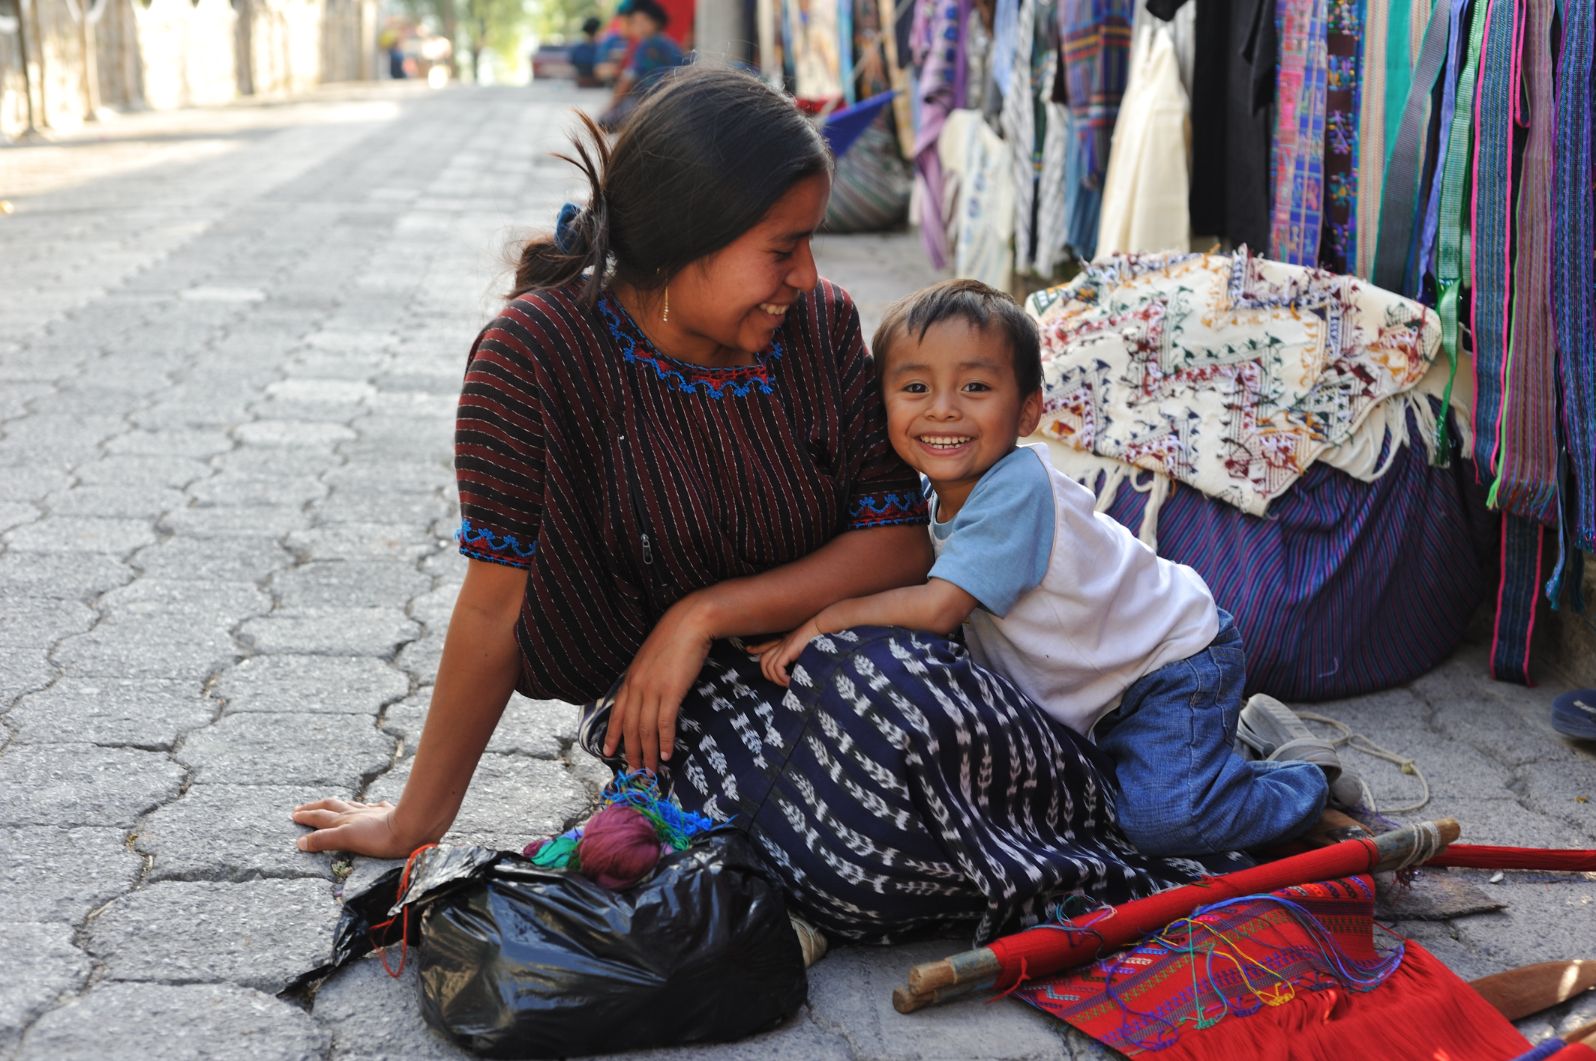 Mother and small child in Guatemala